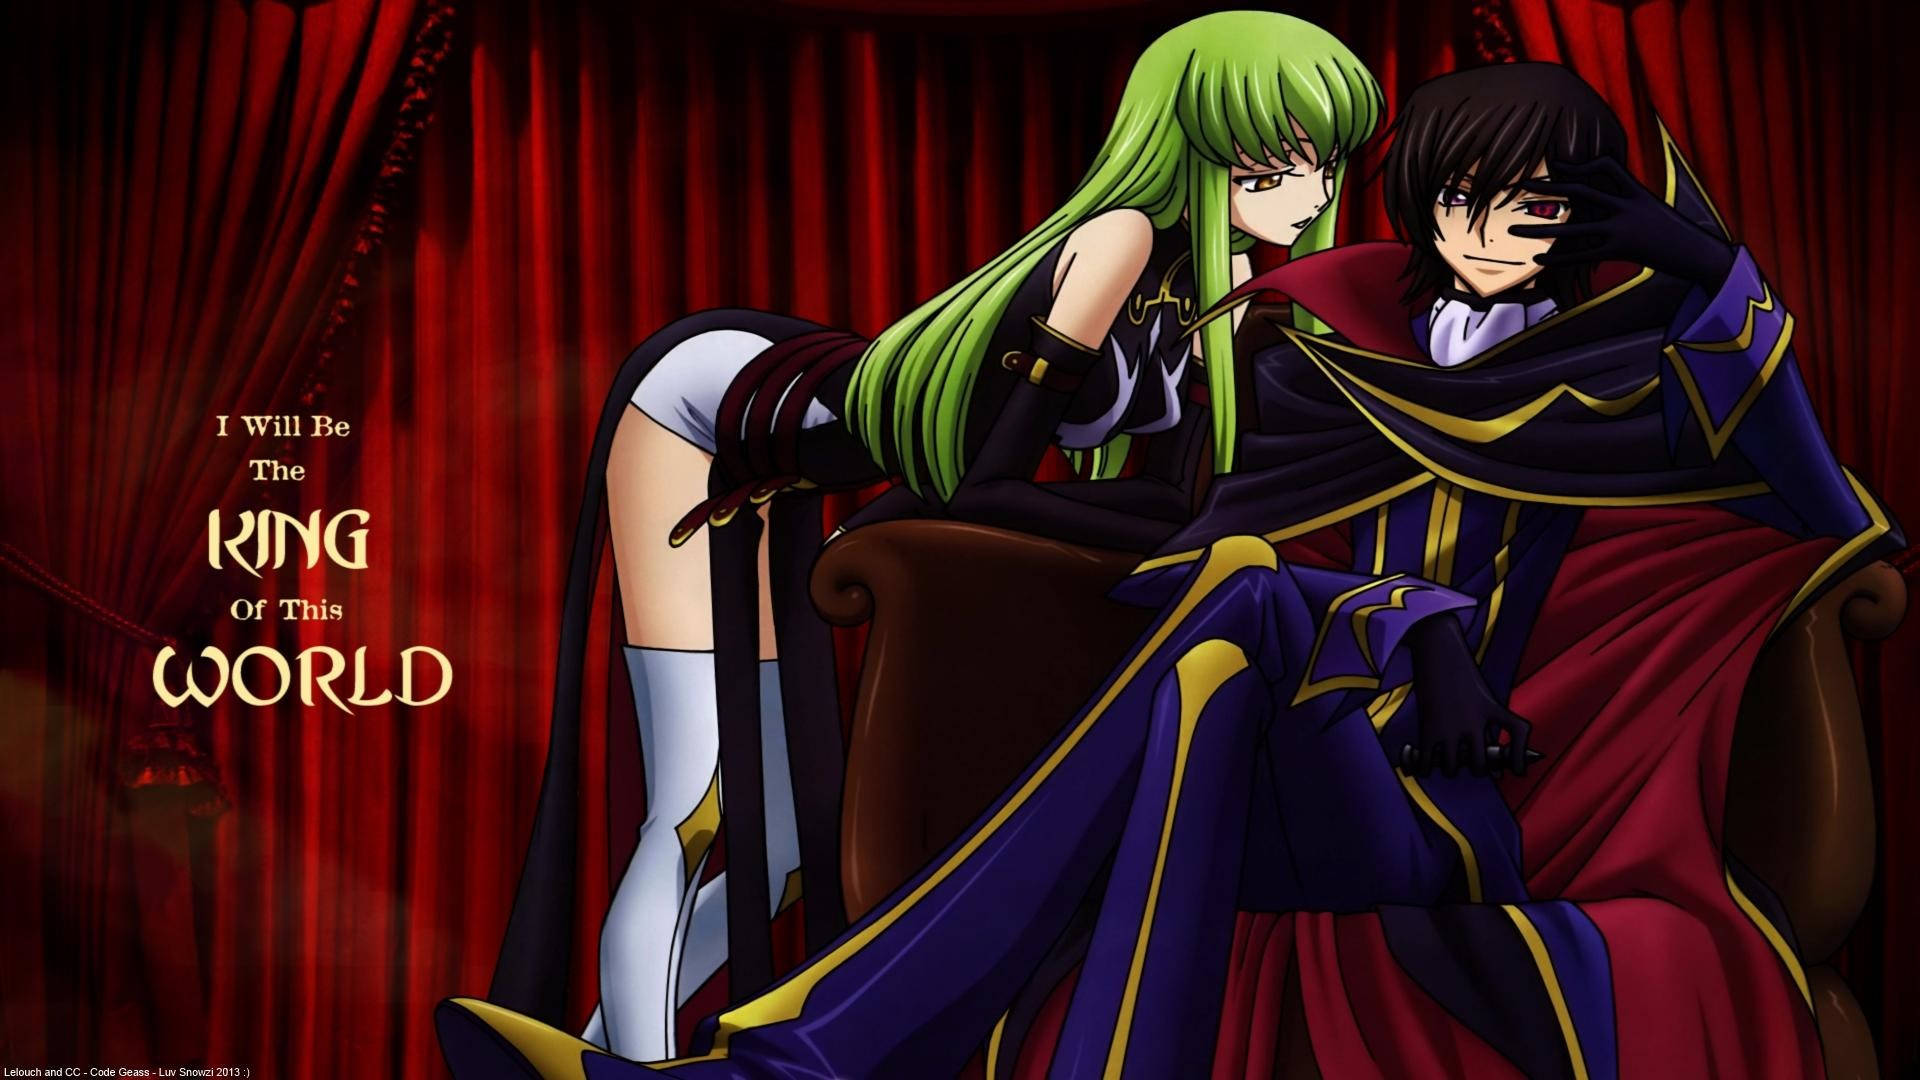 Lelouch and C.C, allies in the struggle to fight injustice Wallpaper